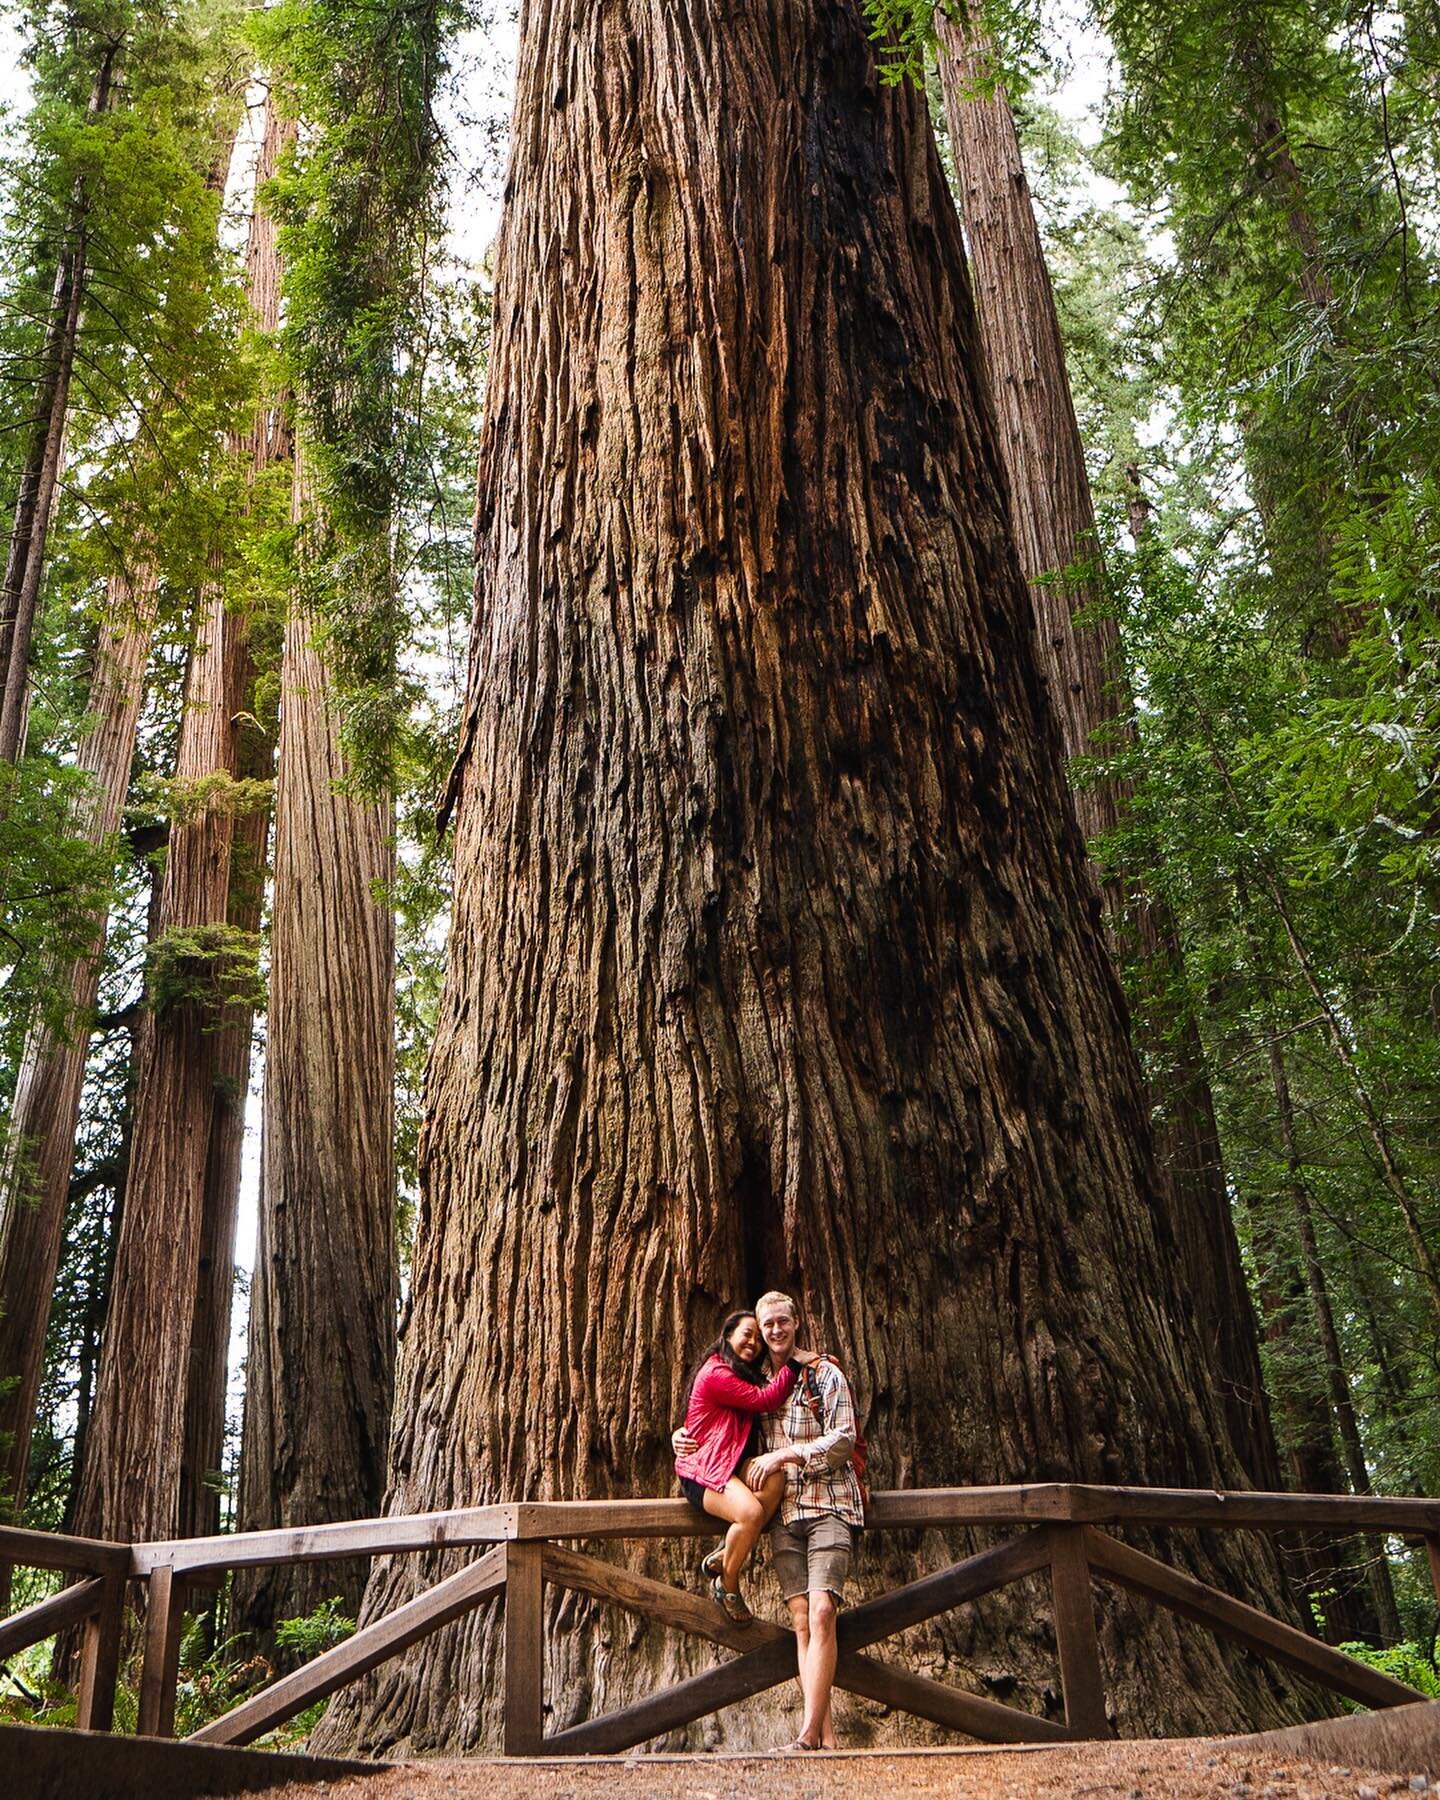 Found me the tallest man I could find, and brought him to see the tallest trees! (He&rsquo;s 6&rsquo;3 and I&rsquo;m 4&rsquo;11) Here&rsquo;s our photo op with the largest tree in the world! 🥲 
Ticked off another national park, and oh boy it might b